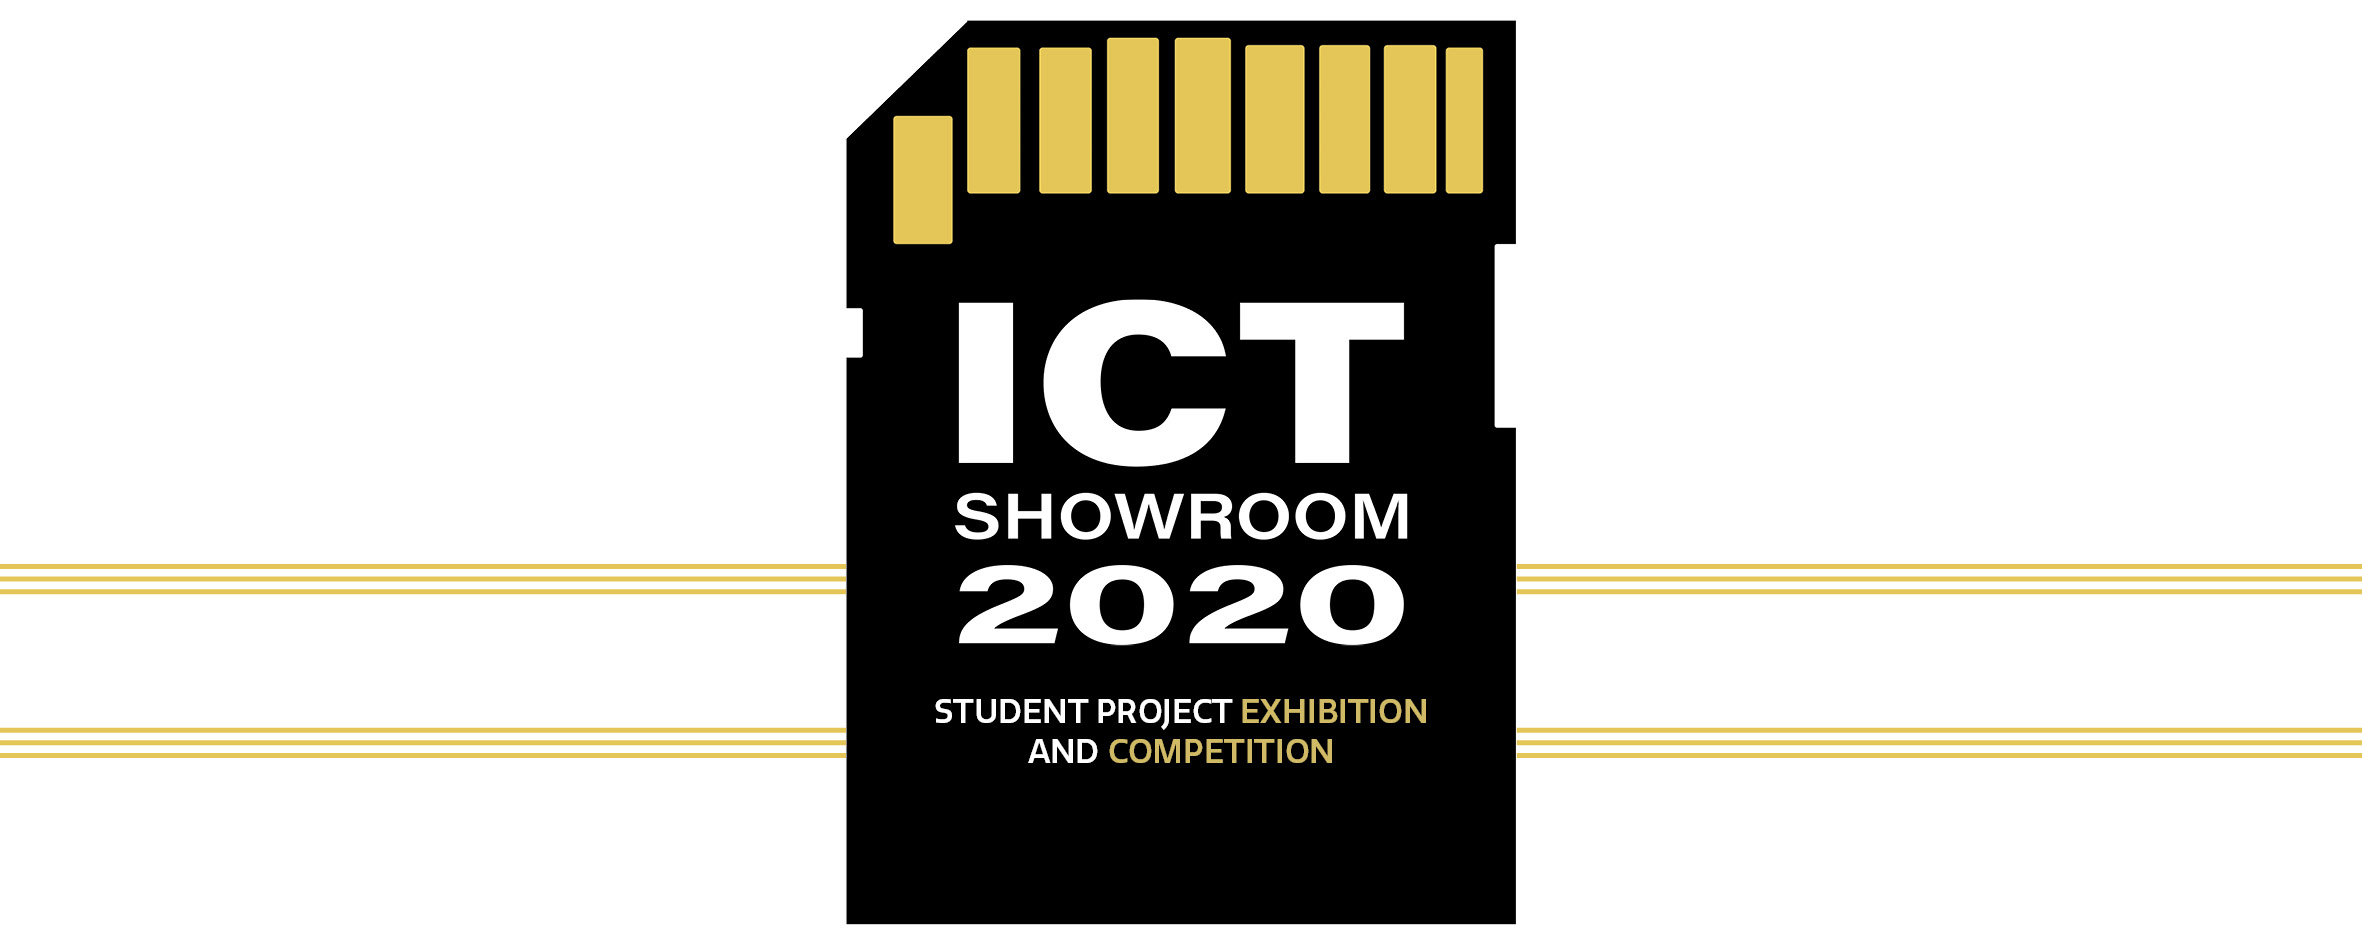 ICT Showroom 2020, date: March 5th 2020, time: 10:00-14:00 / 10am - 2pm, place: ICT City, Turku 